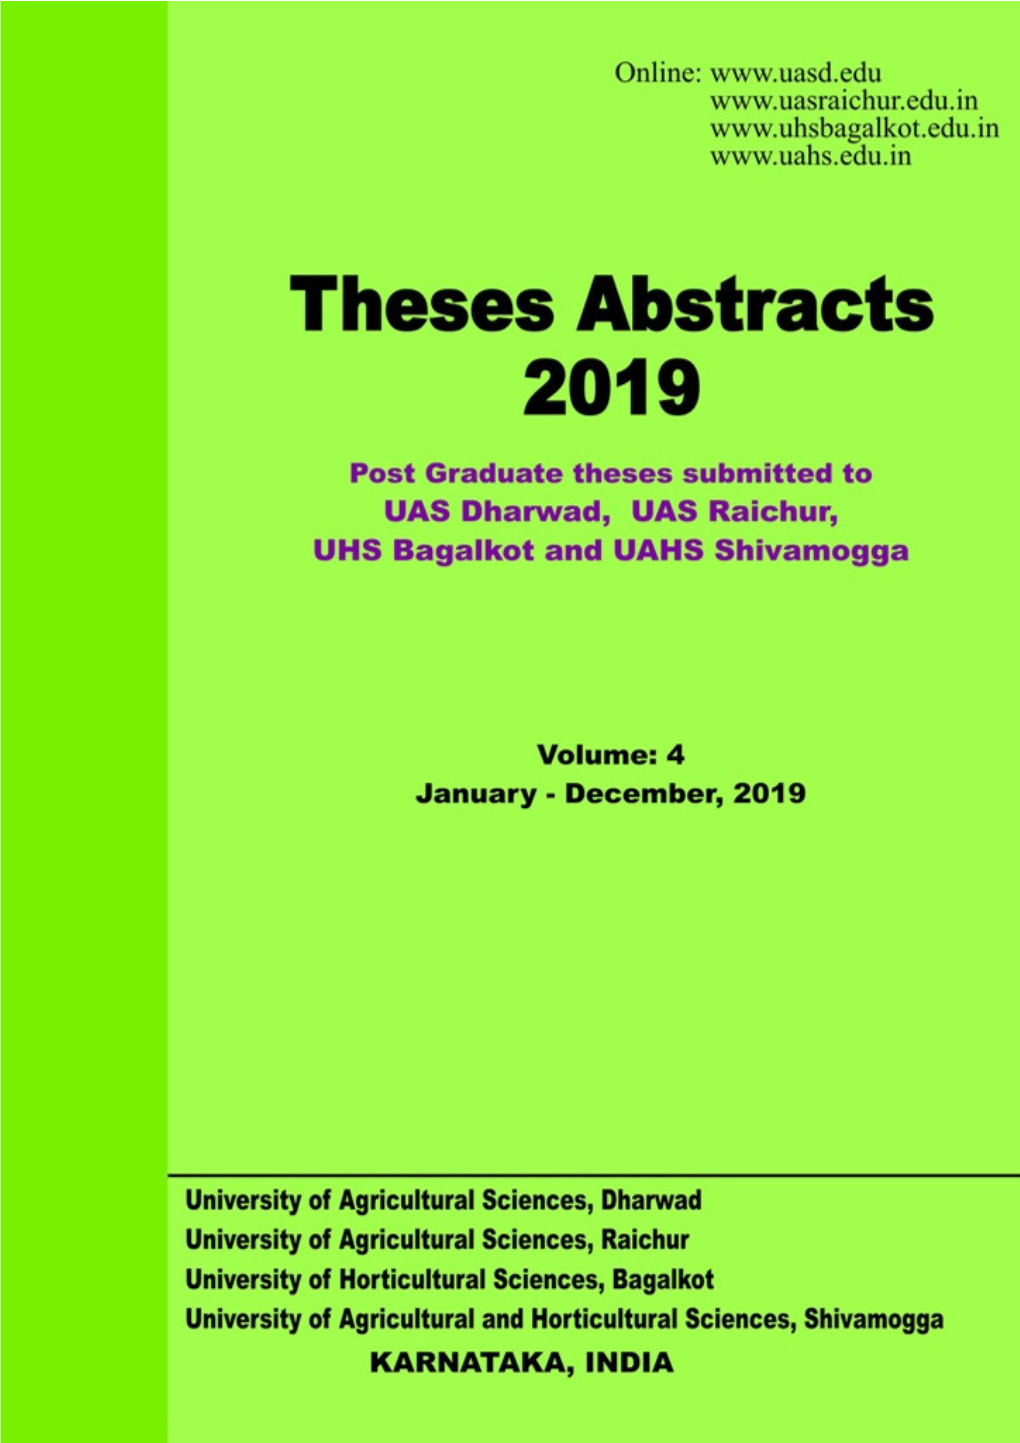 Theses Abstracts 2019 Post Graduate Theses Submitted to UAS Dharwad, UAS Raichur, UHS Bagalkot and UAHS Shivamogga